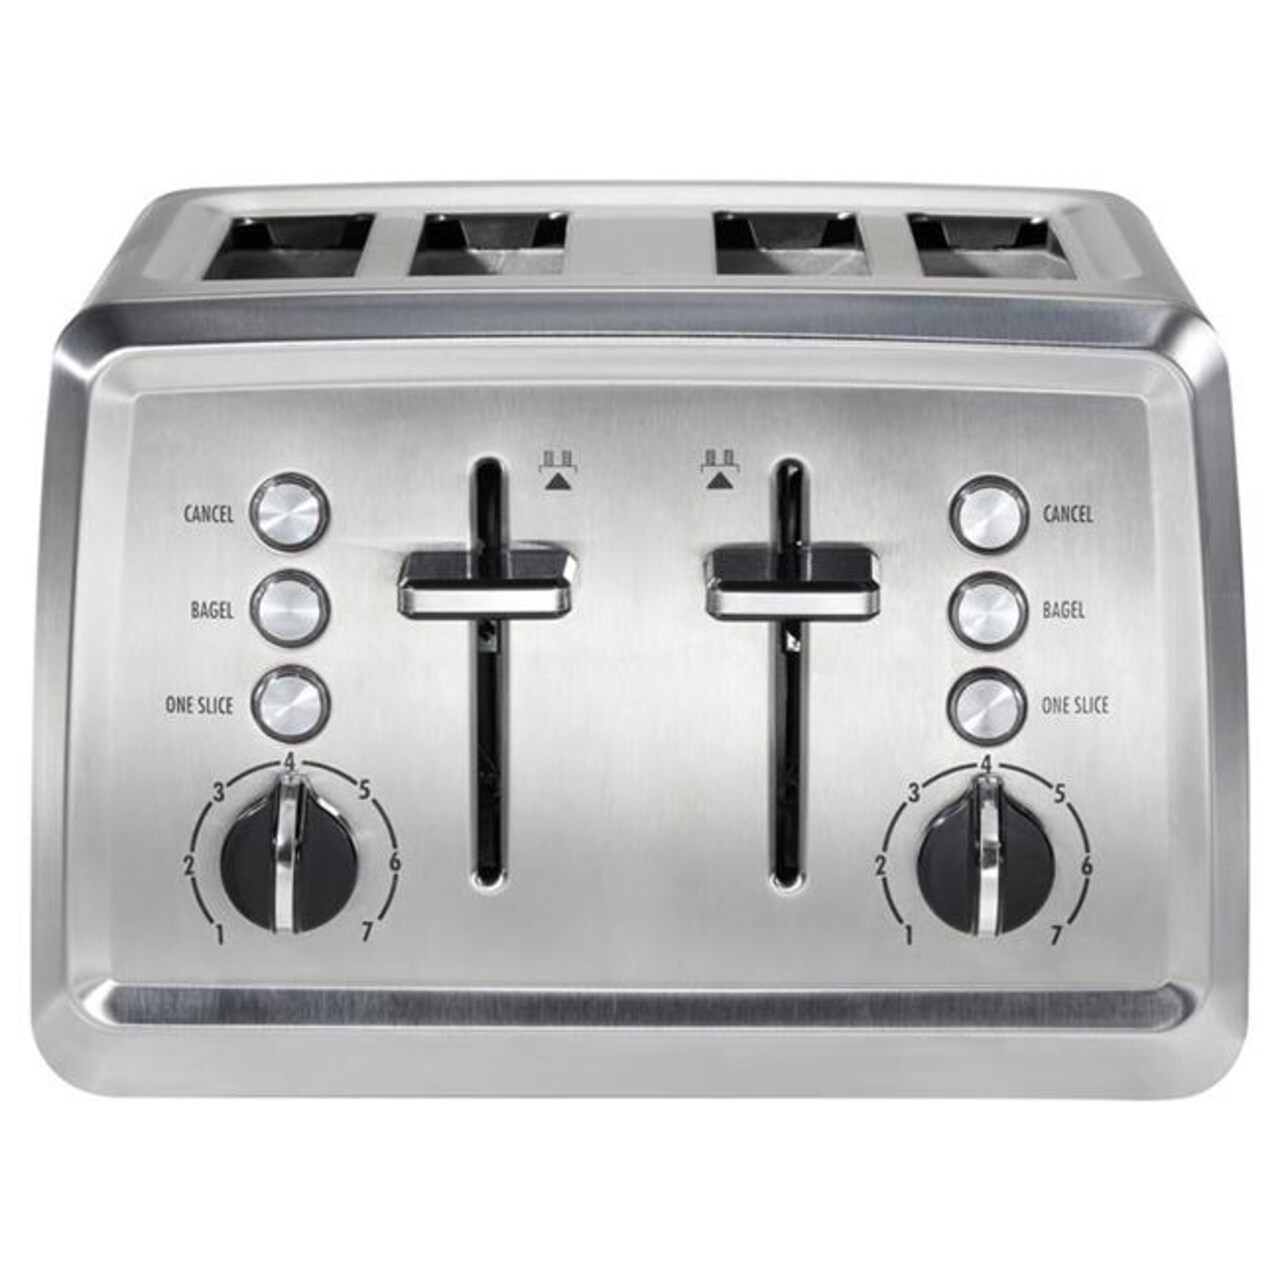 Hamilton Beach 6046845 7.68 x 11.1 x 11 in. Stainless Steel 4 Slot  Toaster, Silver